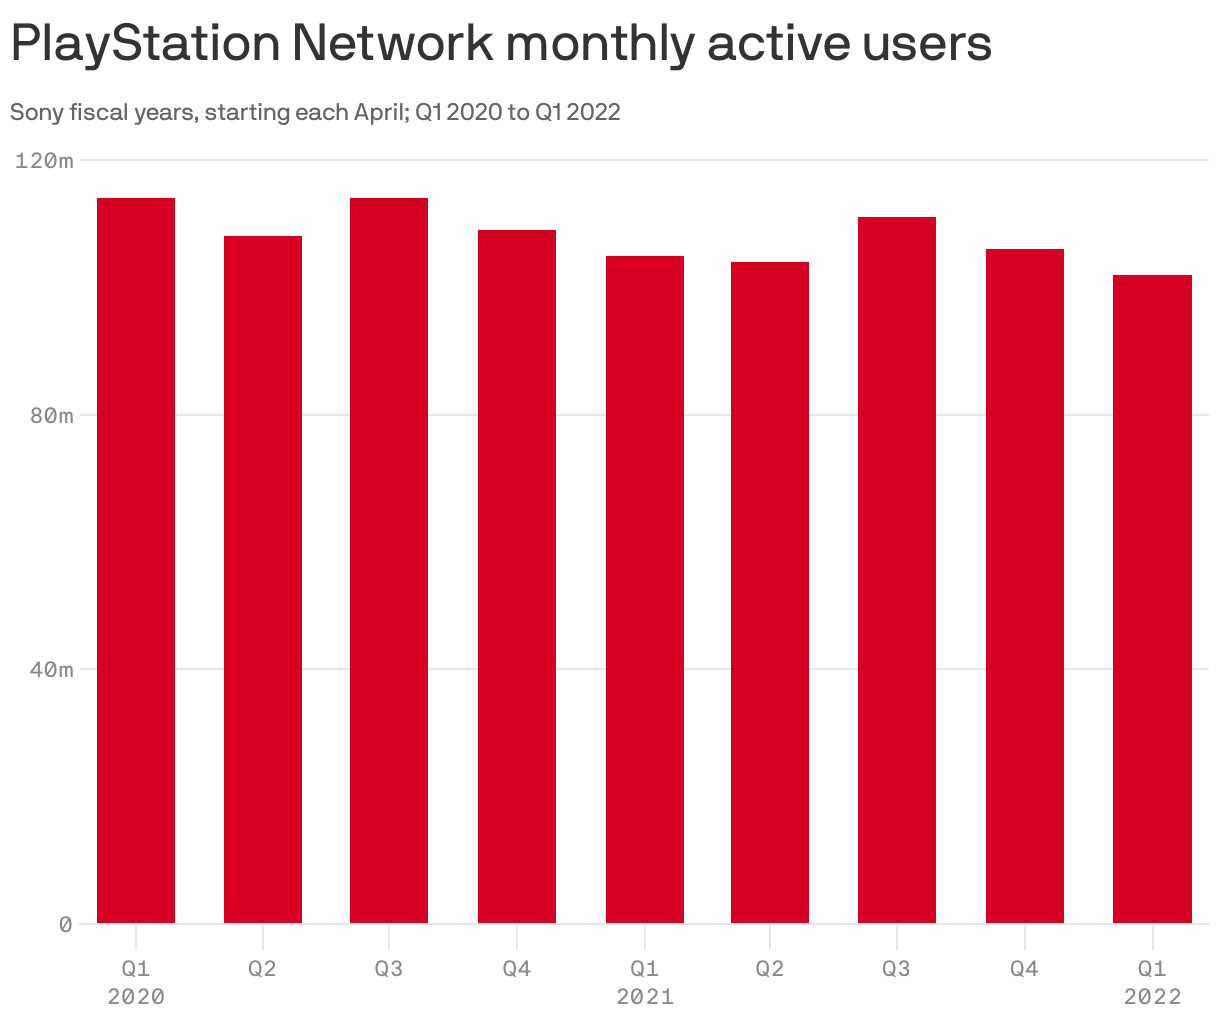 PlayStation Network monthly active users